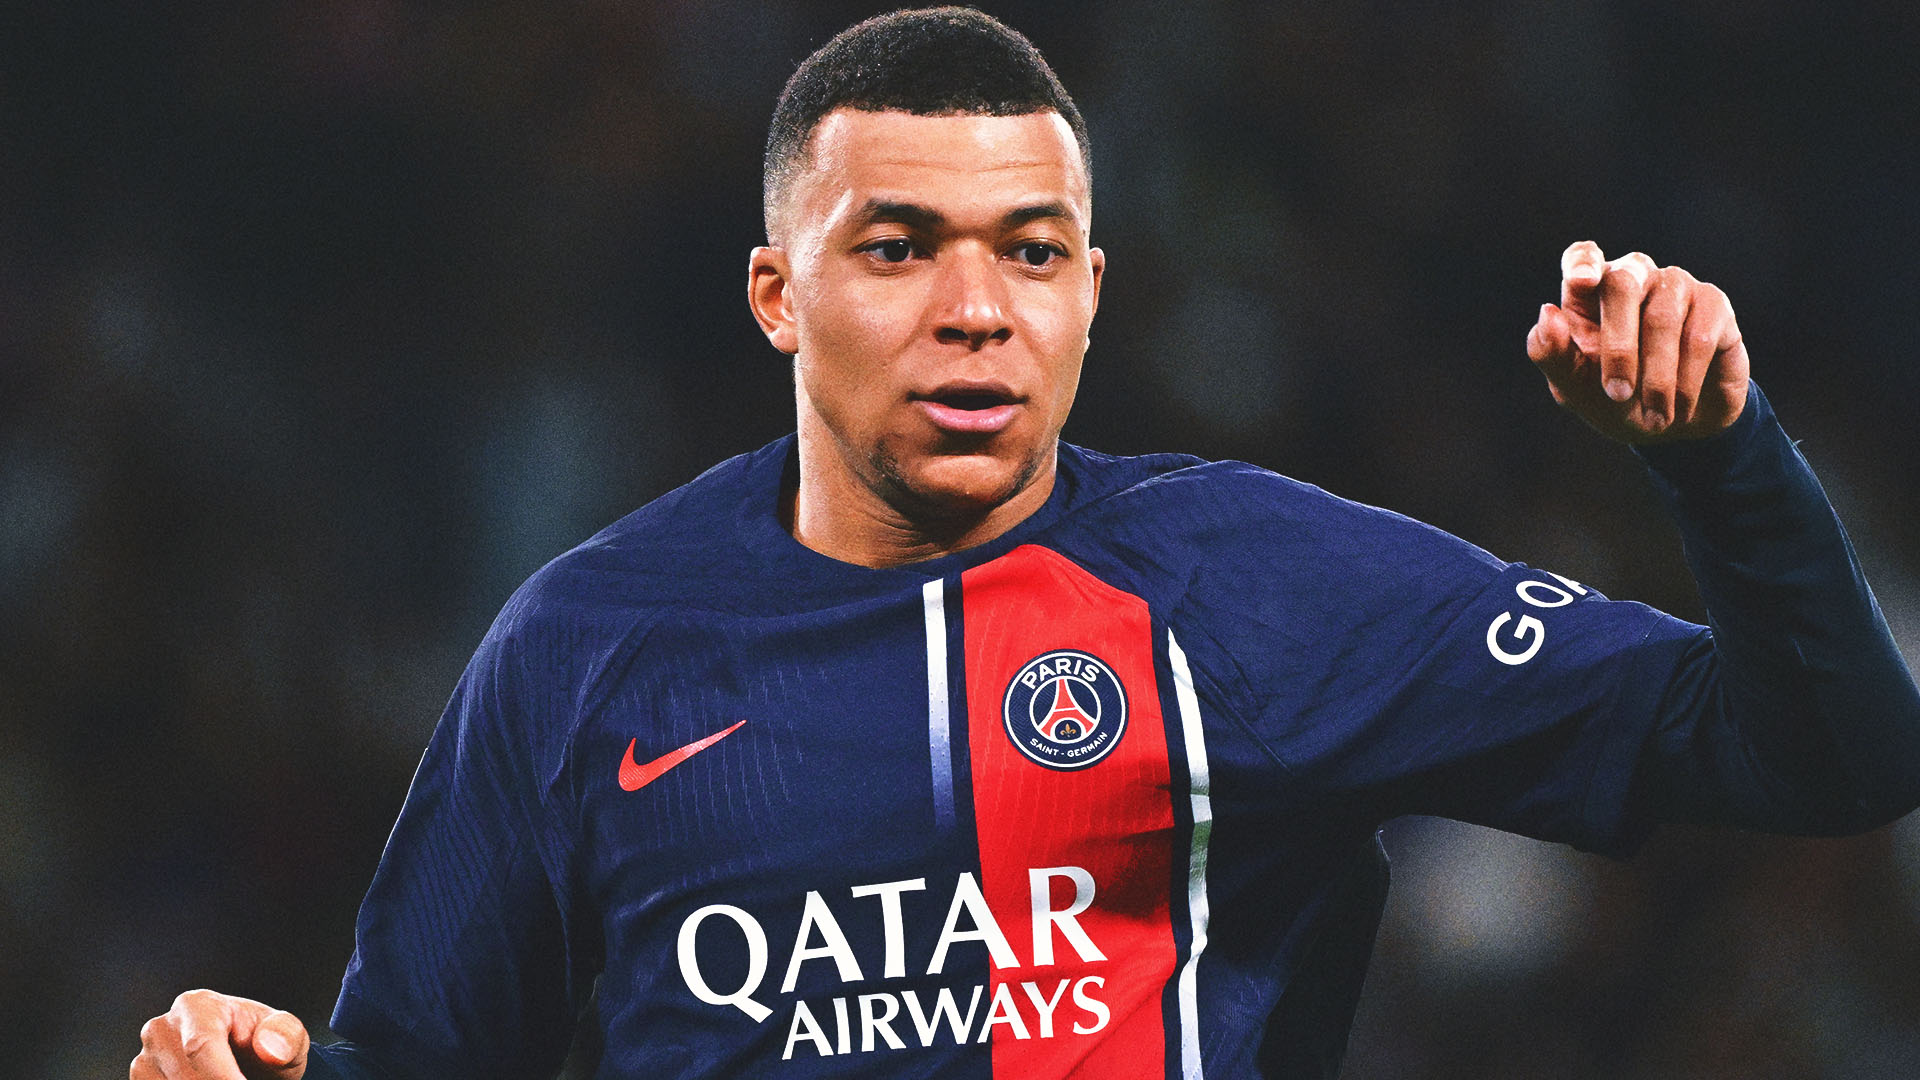 Kylian Mbappé gives PSG glimmer of hope he might stay